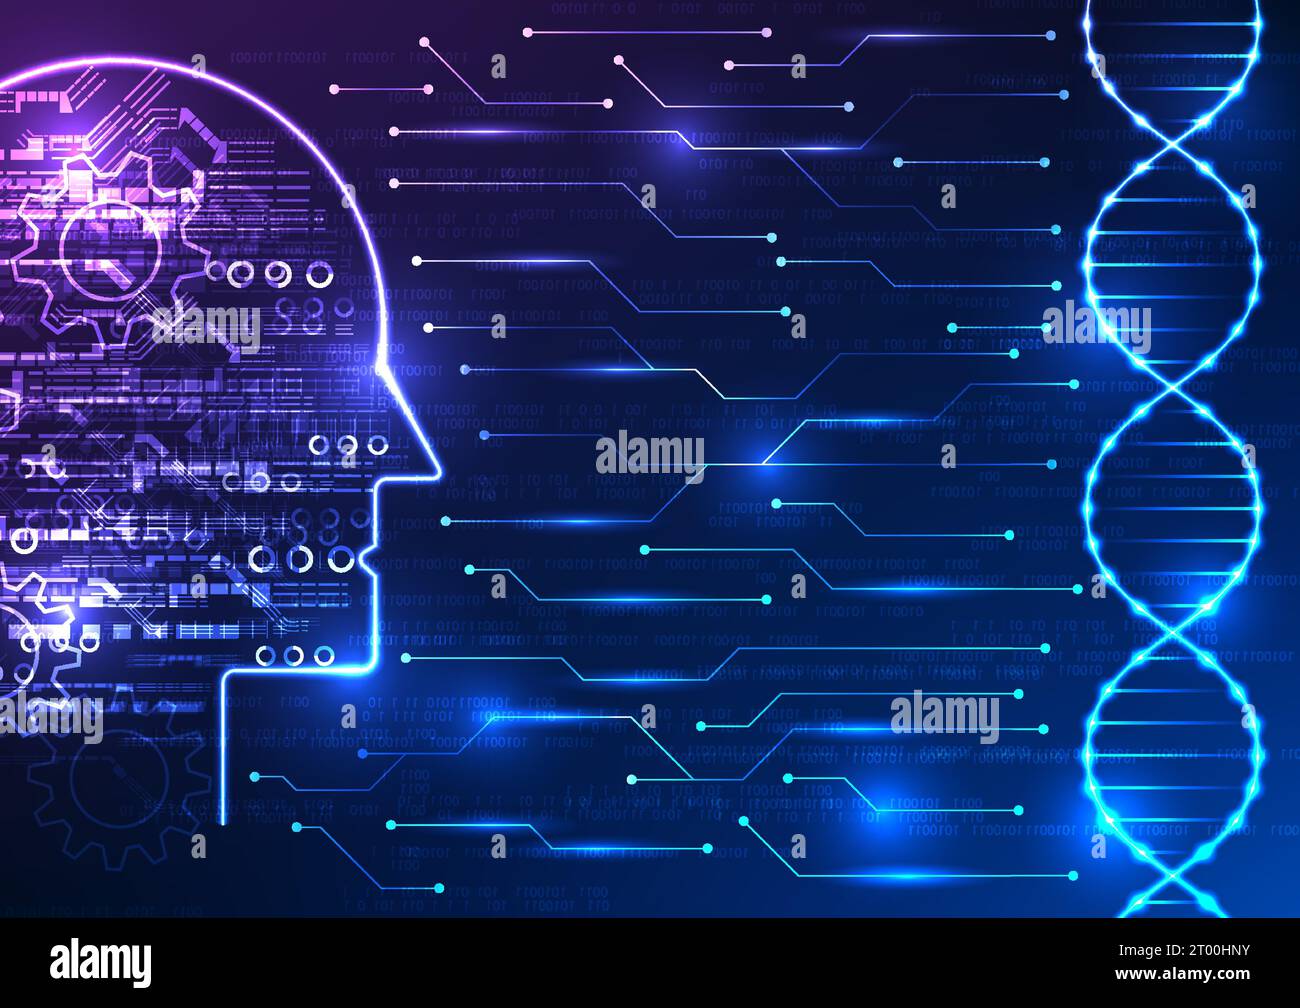 Medical technology and artificial intelligence in a captivating image. Witness the DNA structure connected to an AI brain through a circuit board, wit Stock Vector